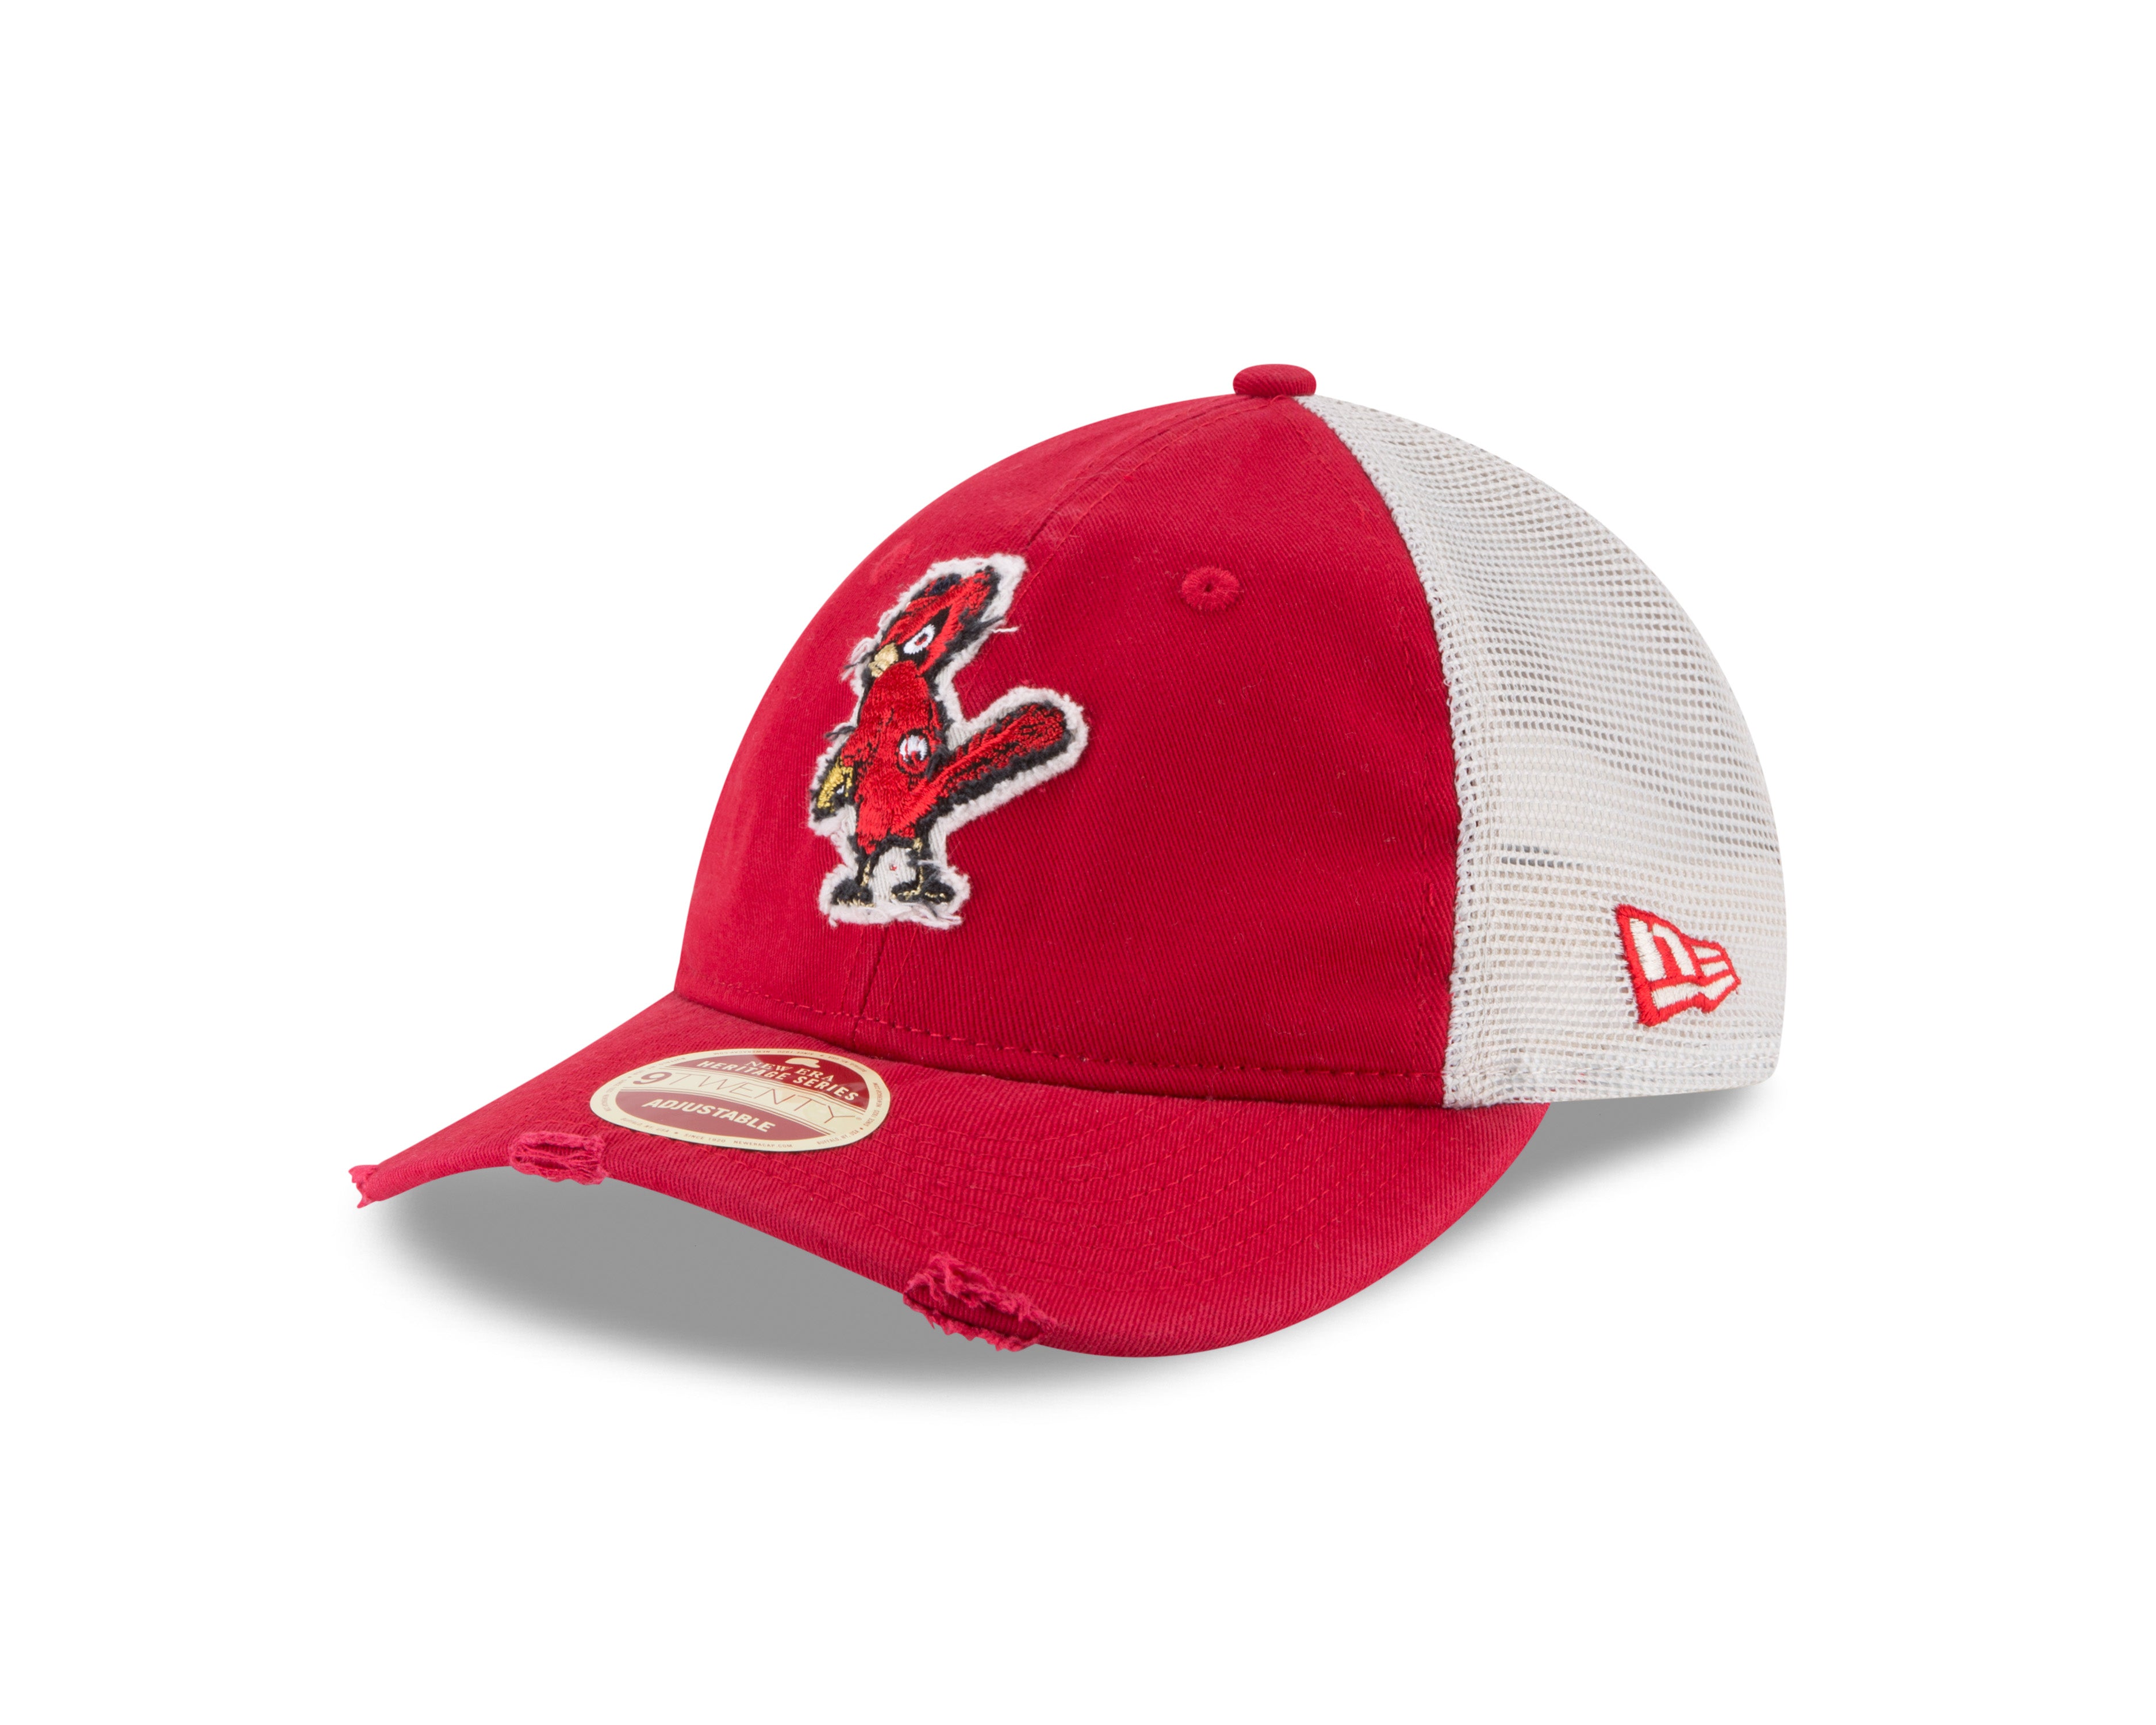 St. Louis Cardinals American Flag Adjustable Clean Up Hat by '47 Brand